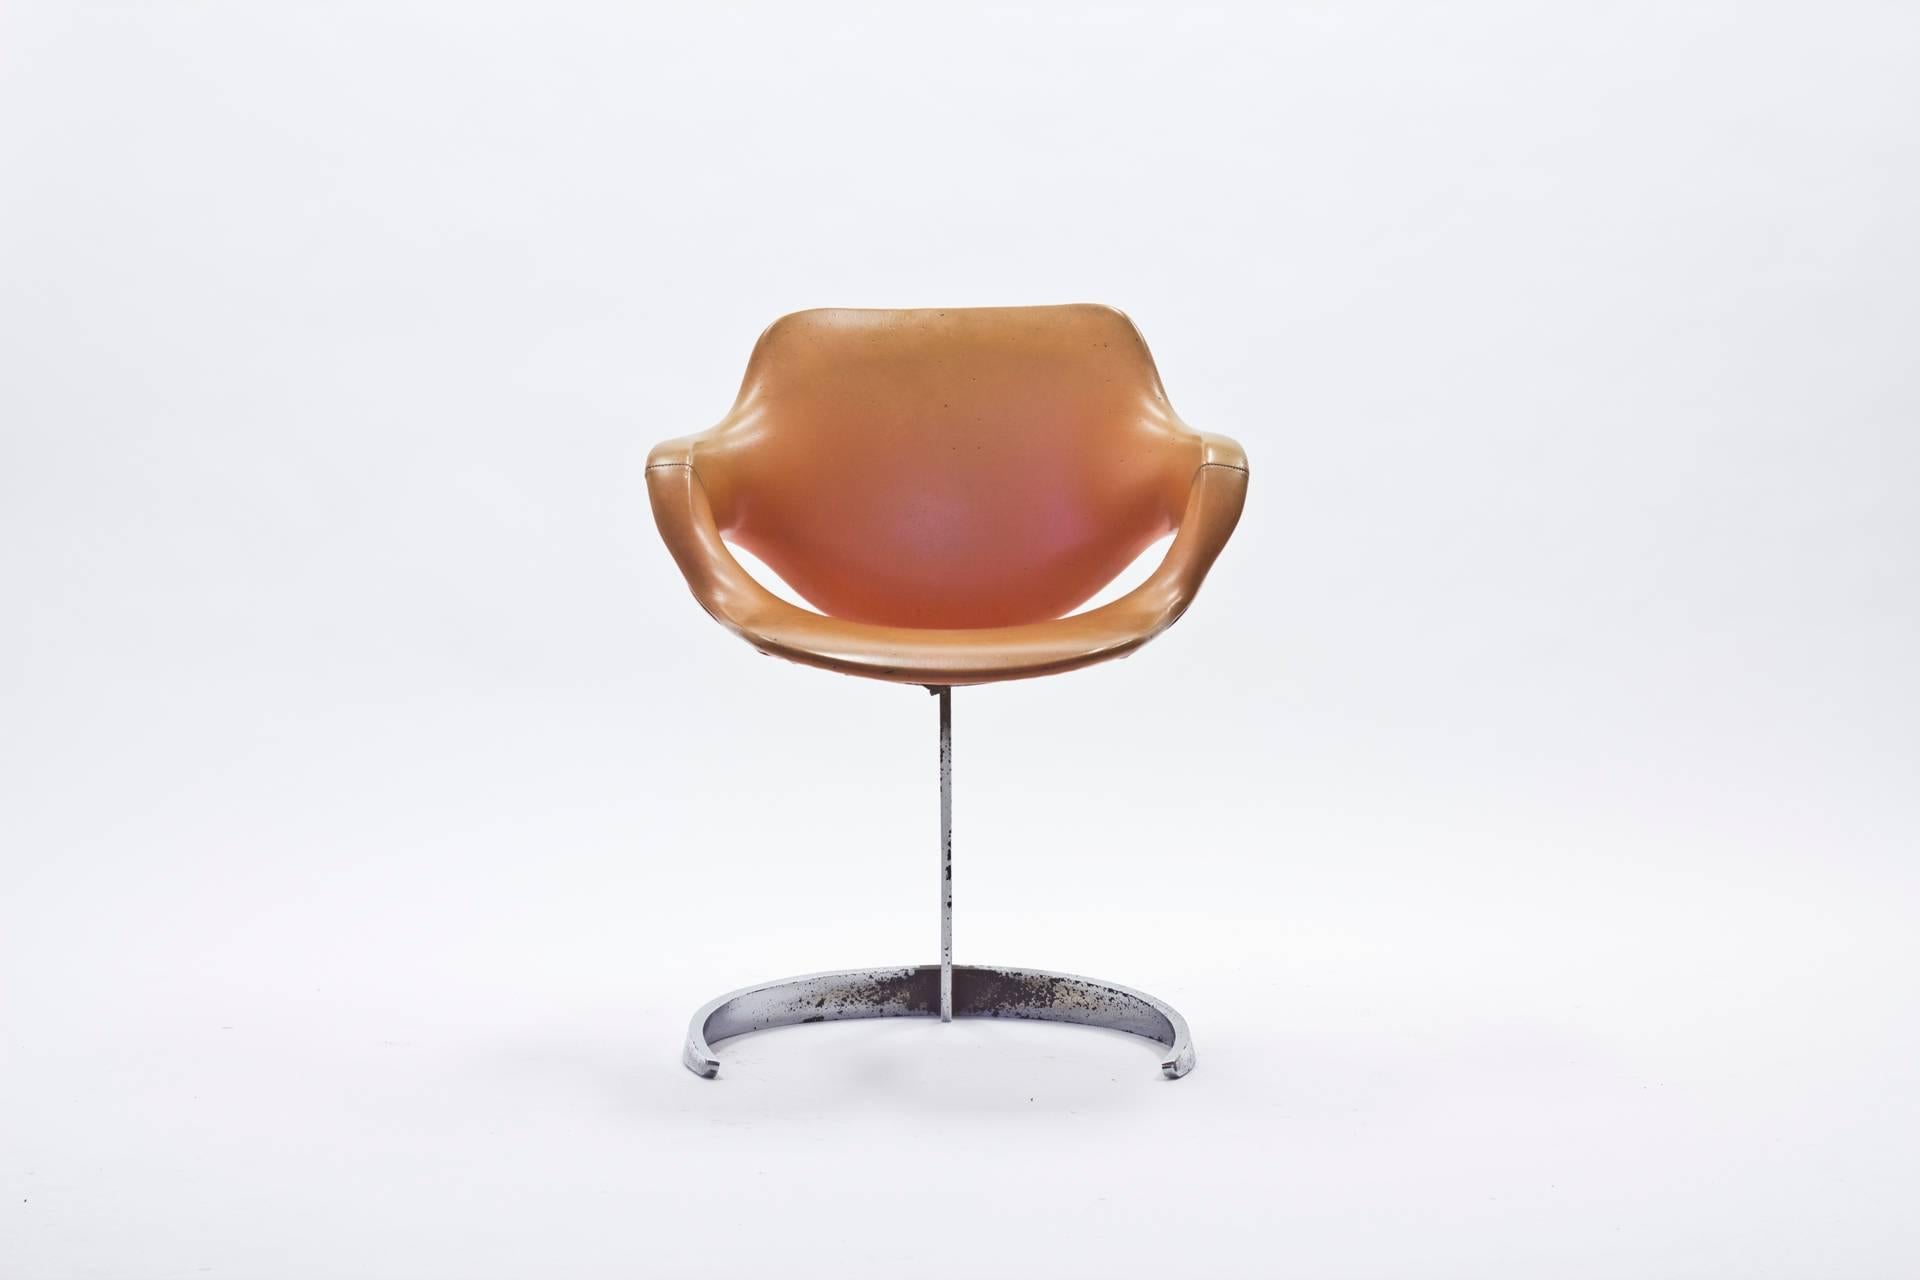 Scimitar armchair designed by Boris Tabacoff during the 1960s for French firm Mobilier Modulaire Moderne. A steel base in a scimitar style holds up a leather seat and back. The base features a bit rust and there is some wear to the leather parts.